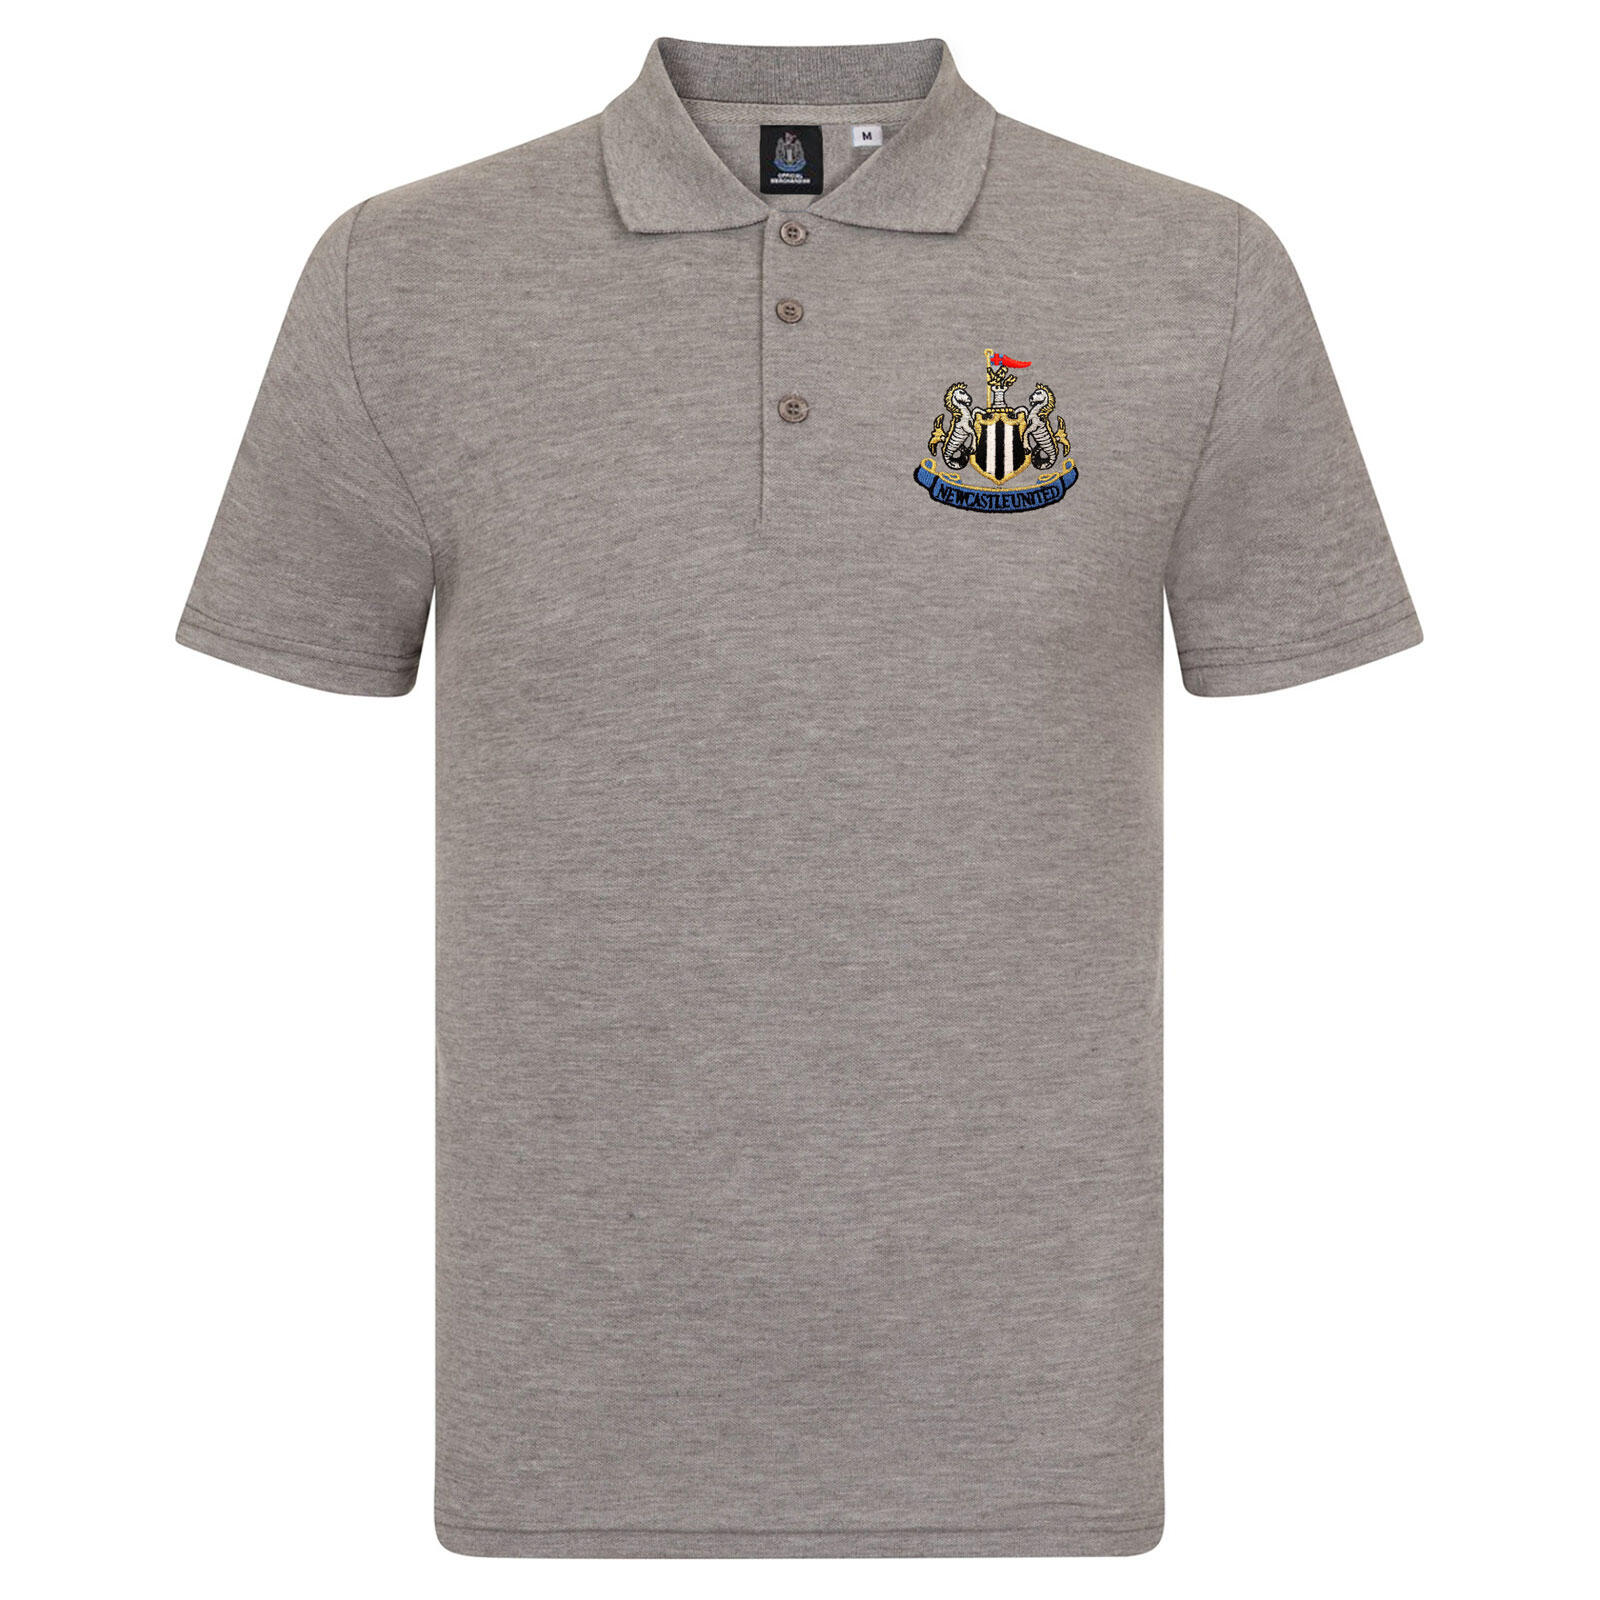 NEWCASTLE UNITED Newcastle United Mens Polo Shirt Crest OFFICIAL Football Gift